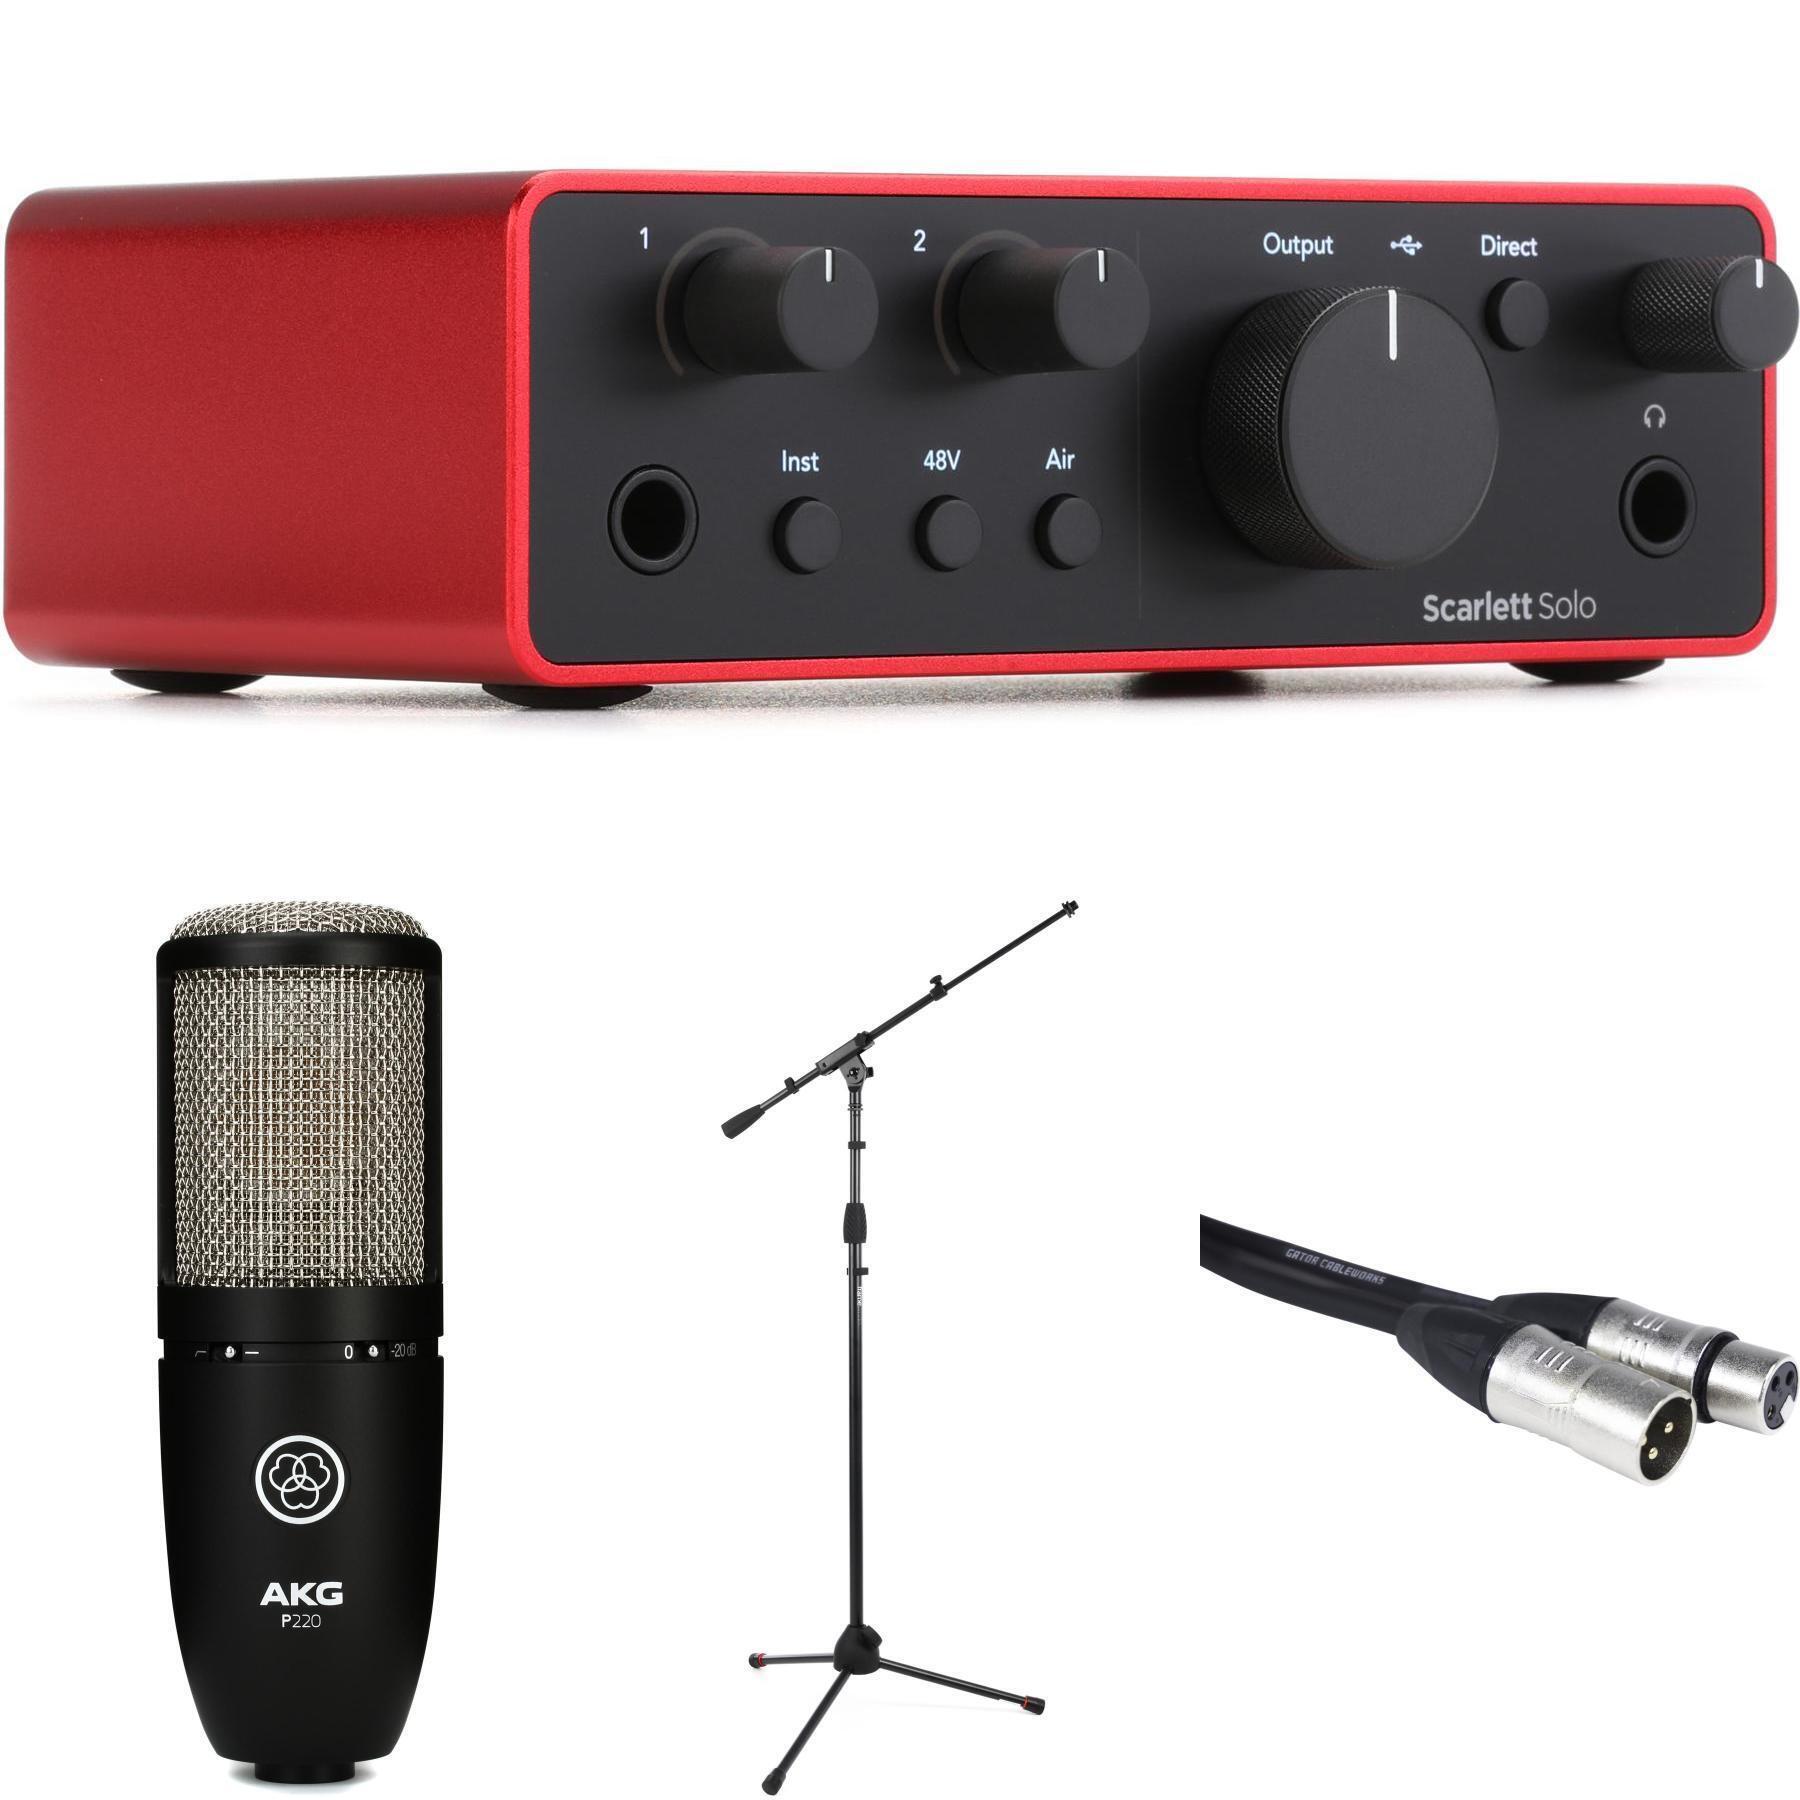 Focusrite Scarlett Solo 4th Gen USB Audio Interface and Shure SM7dB  Microphone Podcasting Kit | Sweetwater